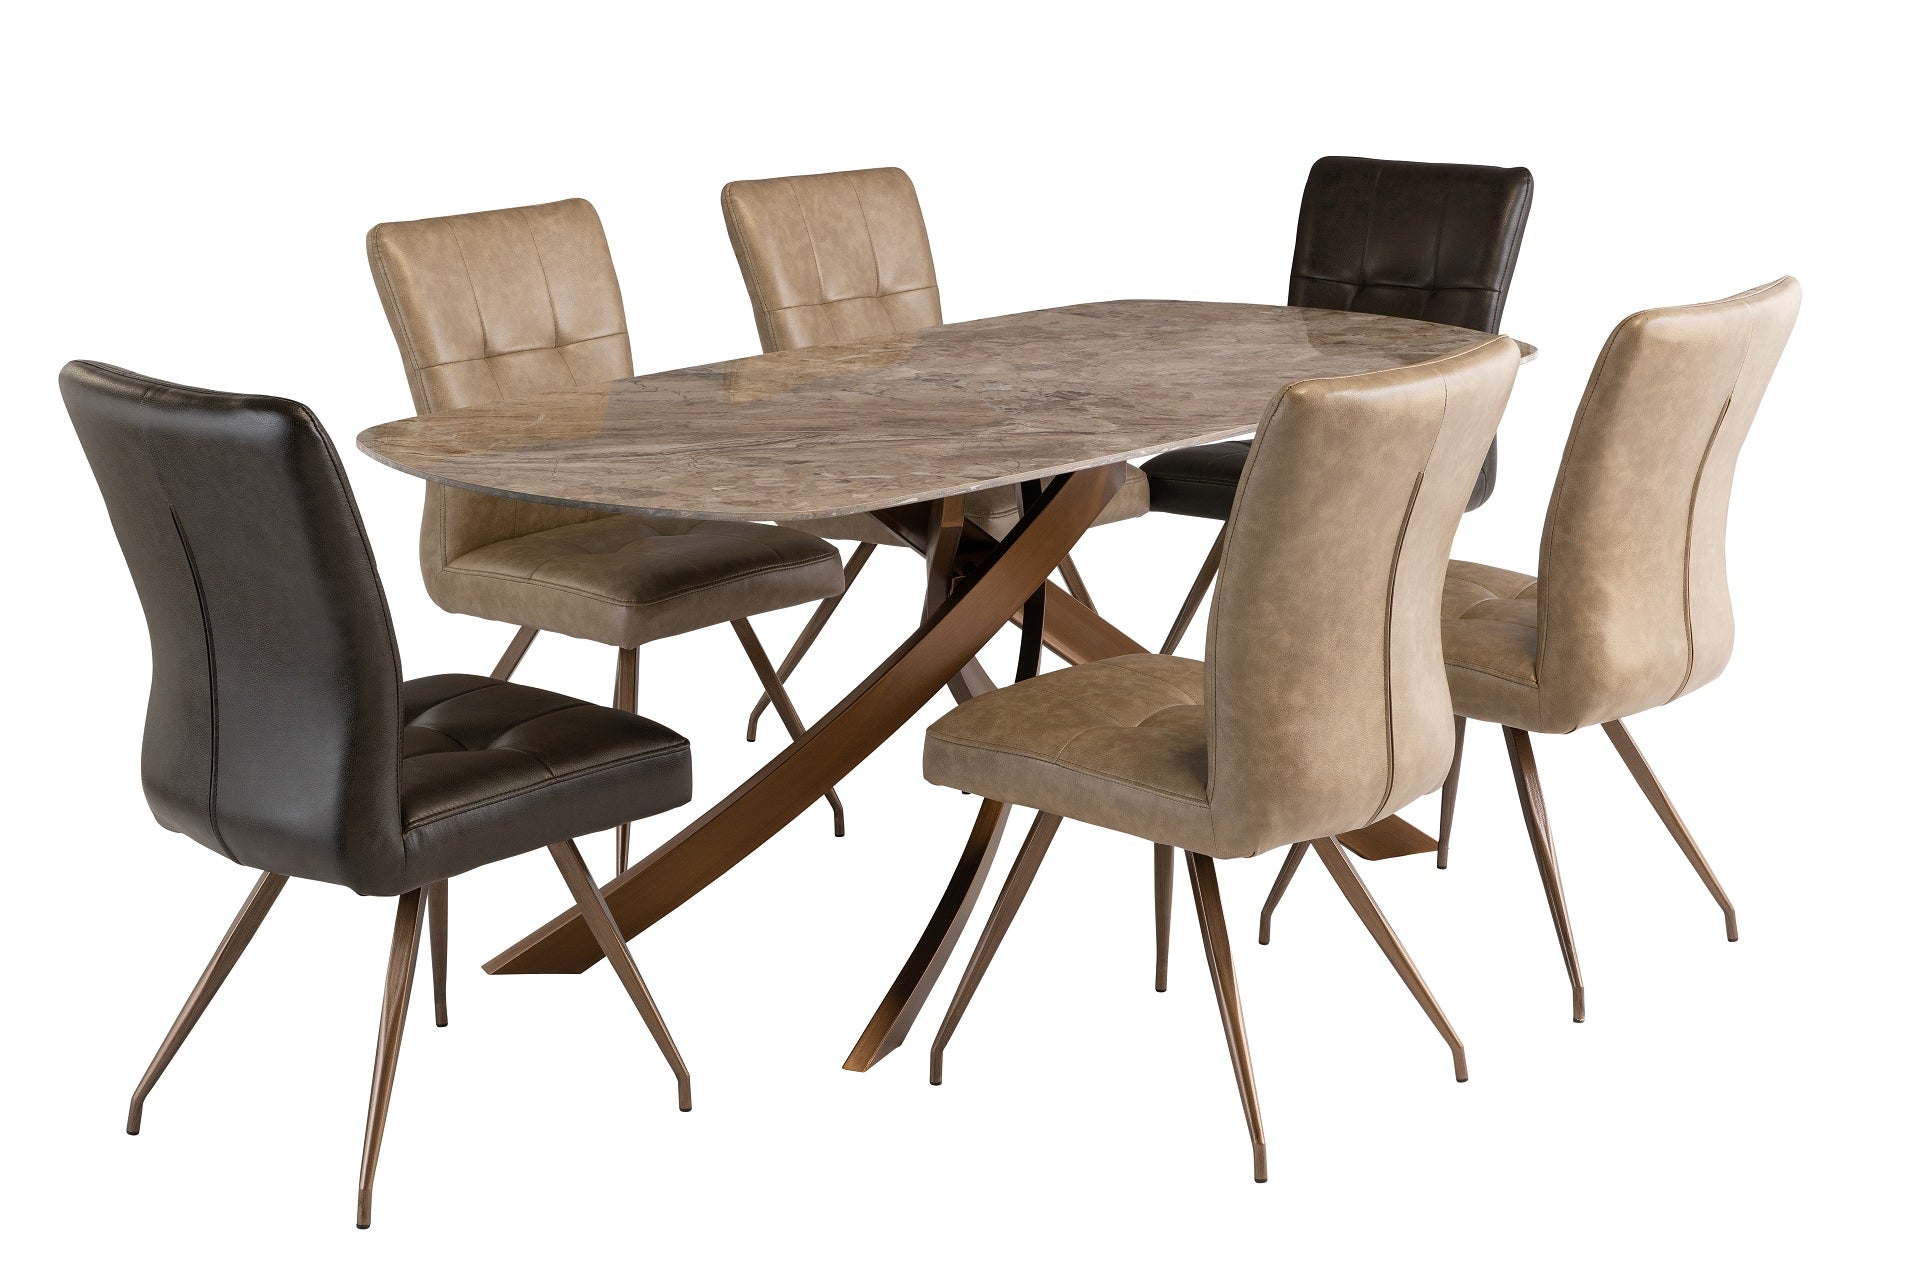 Fenna 1.8m Dining Table - Brown Marble / Brushed Brass Leg